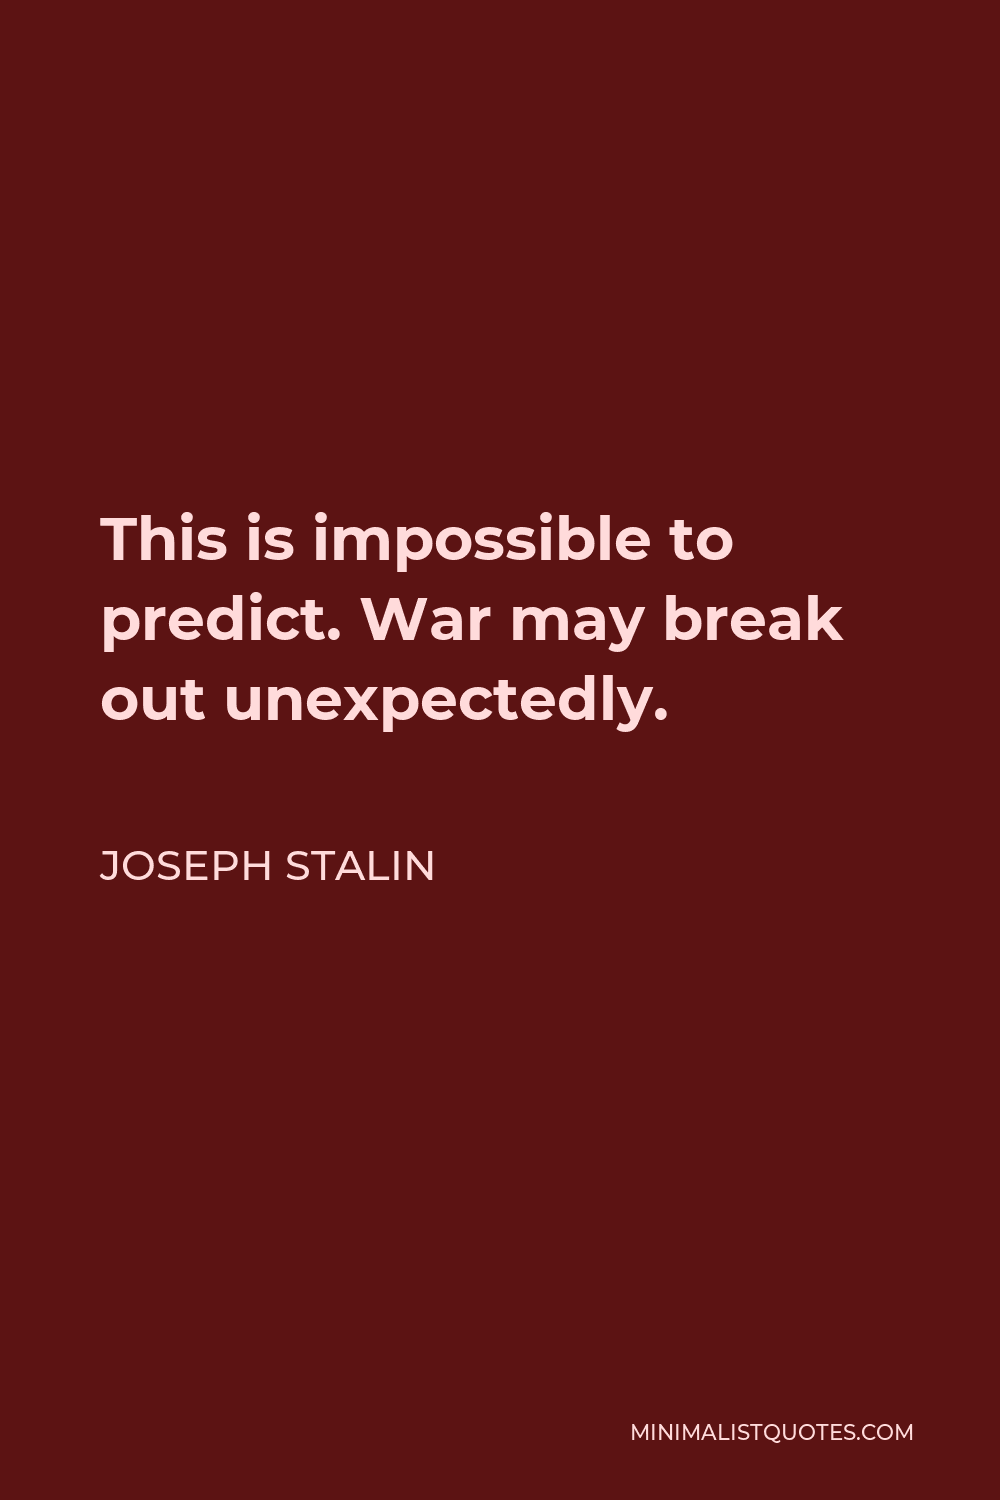 Joseph Stalin Quote - This is impossible to predict. War may break out unexpectedly.